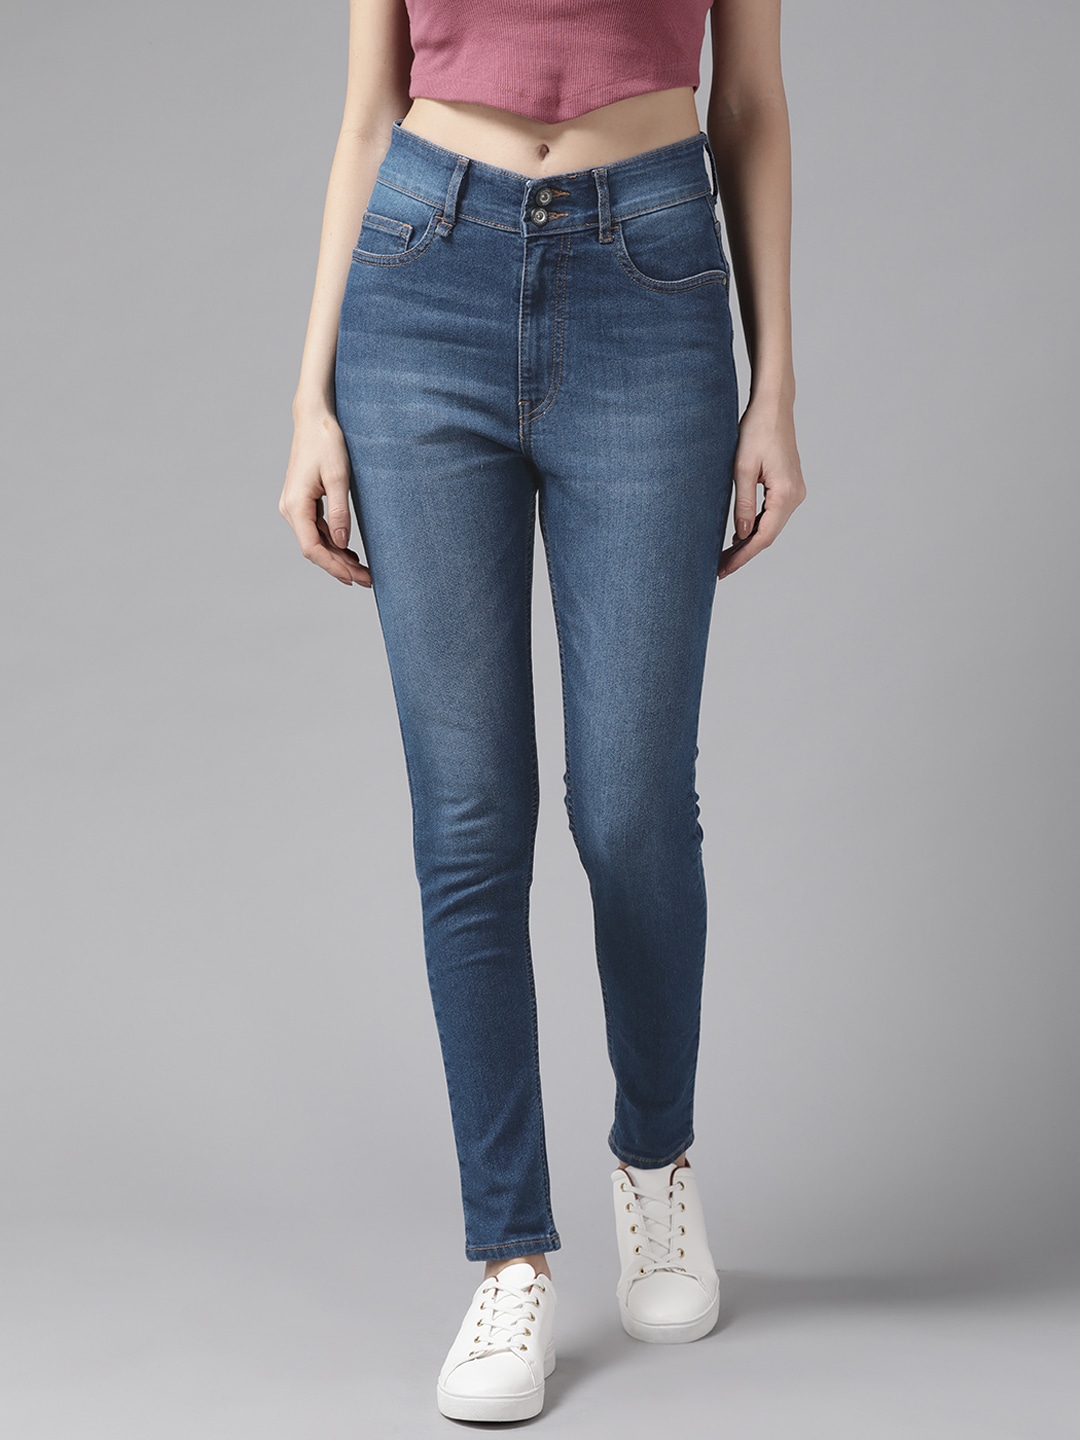 Roadster Women Blue Super Skinny Fit High-Rise Light Fade Stretchable Jeans Price in India